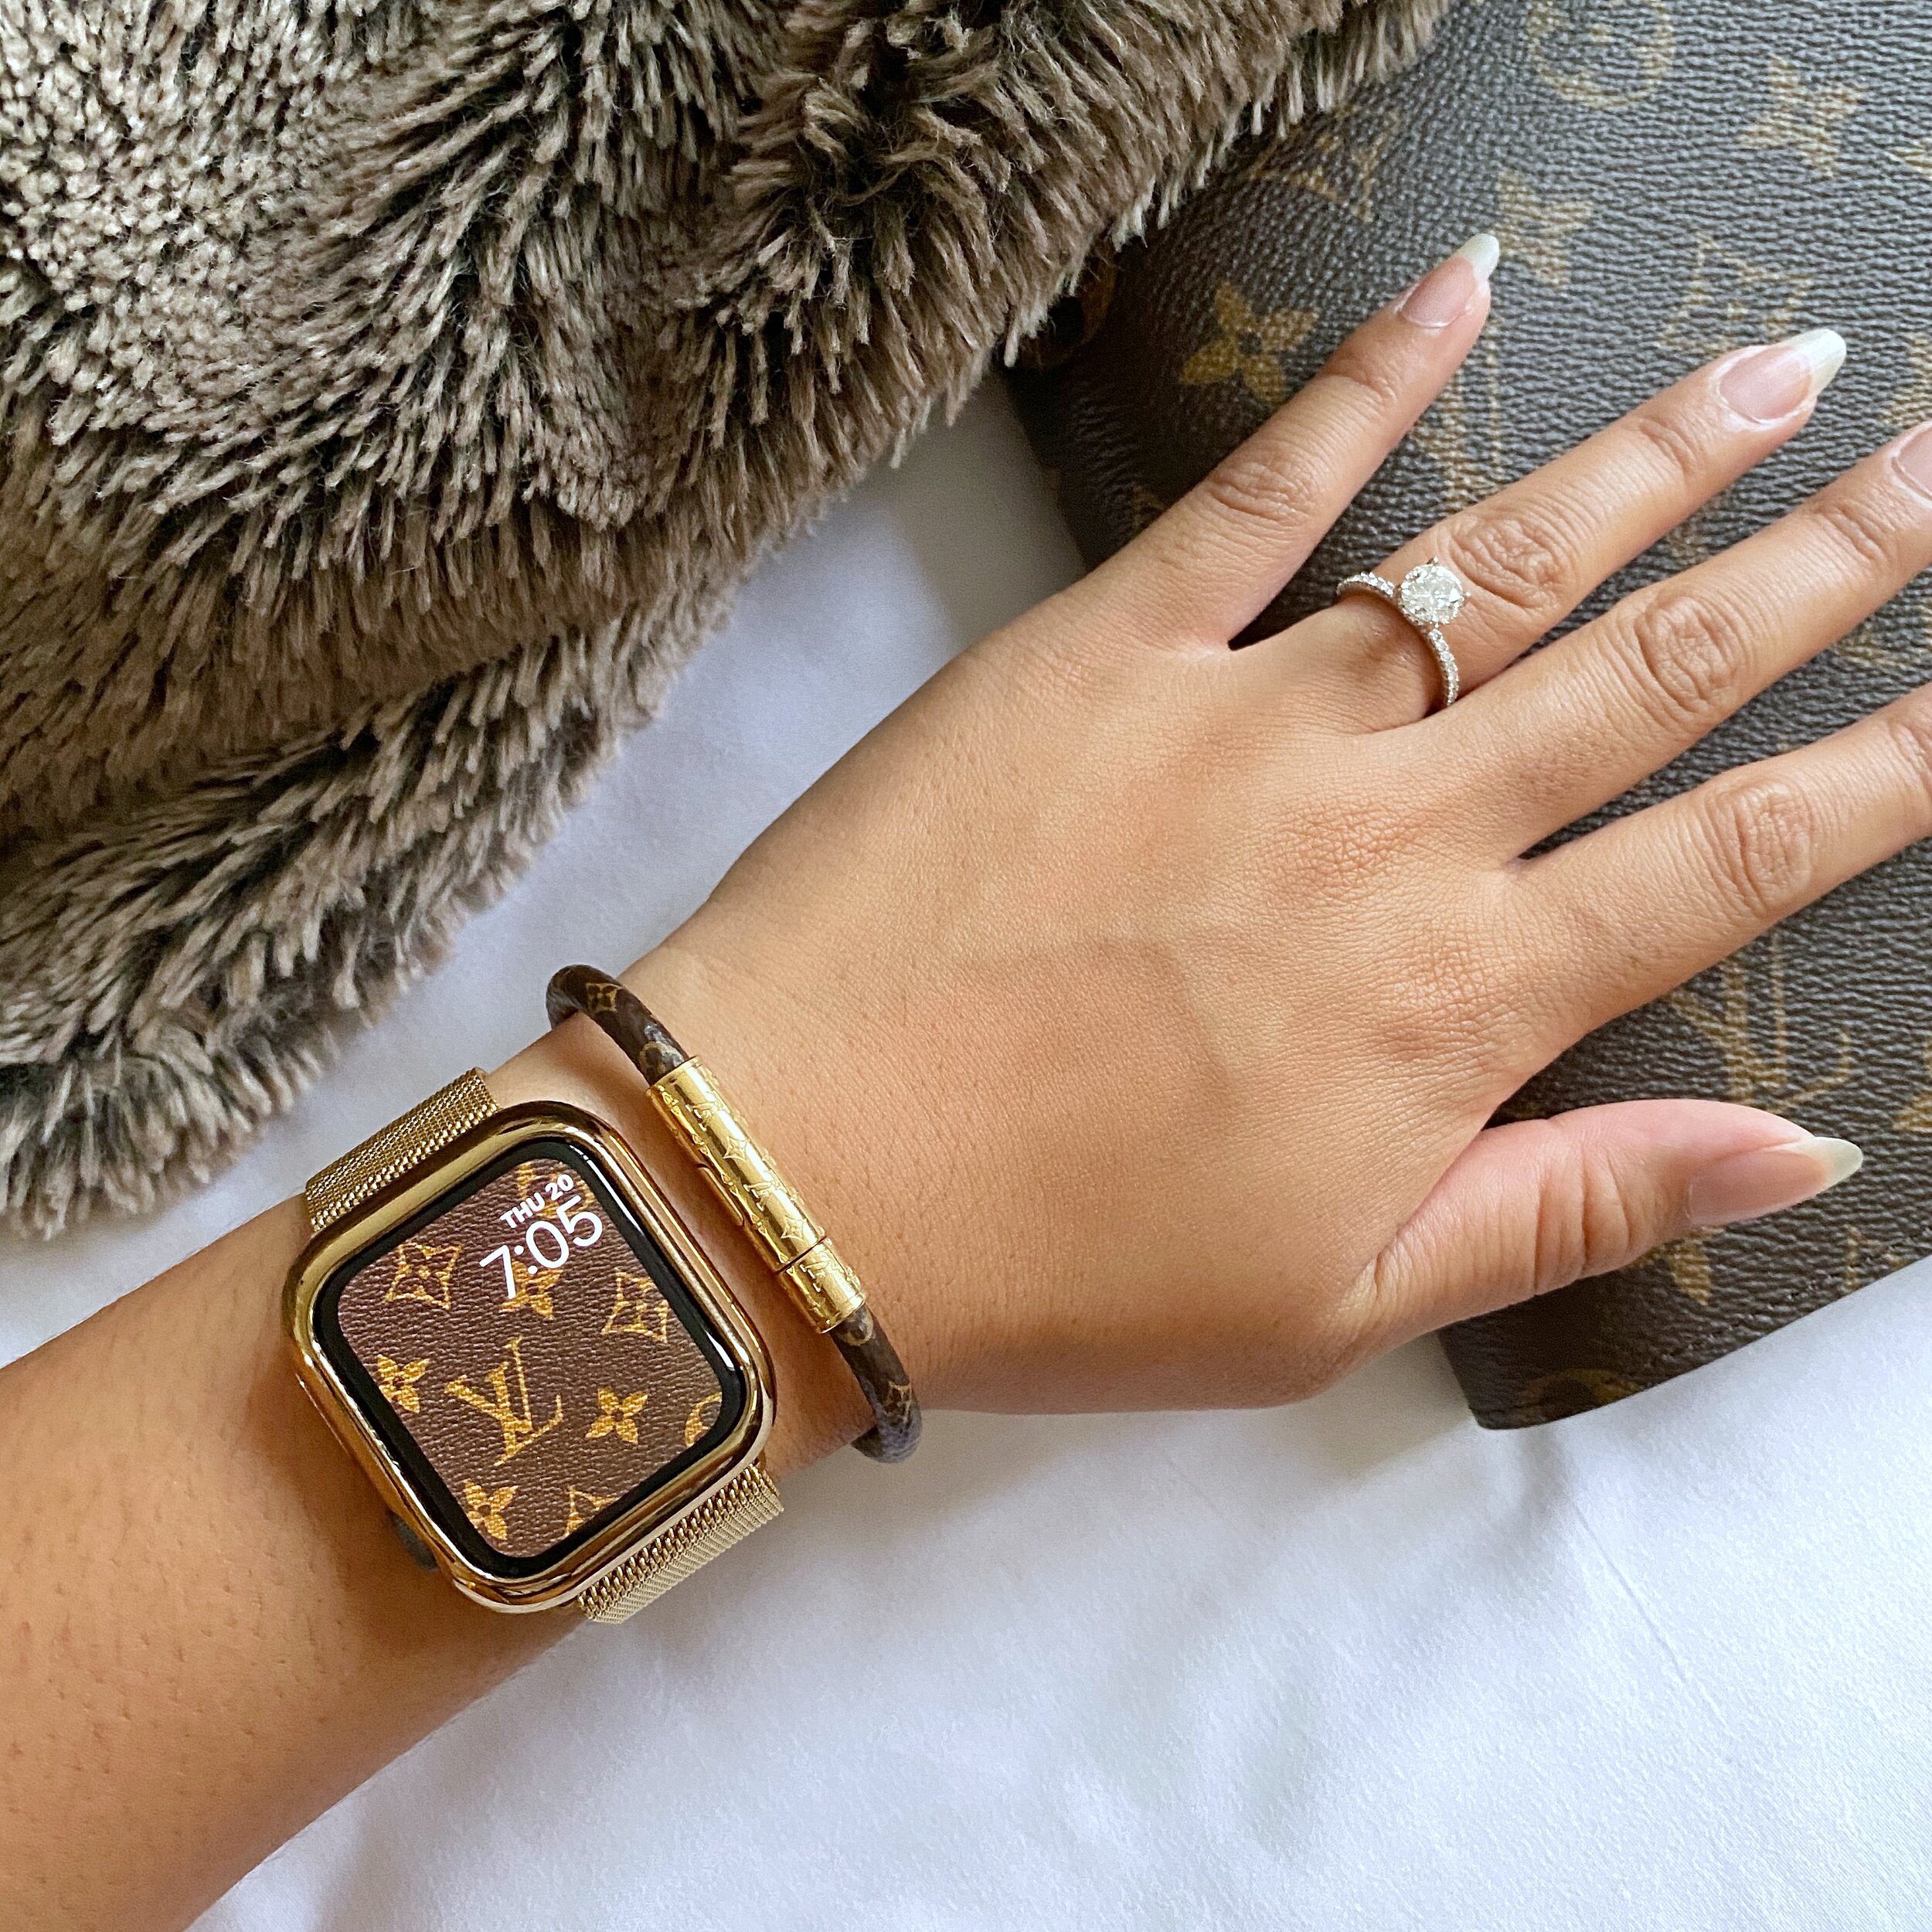 How to Make Your Apple Watch Luxurious for Cheap! — MICHELLE ORGETA